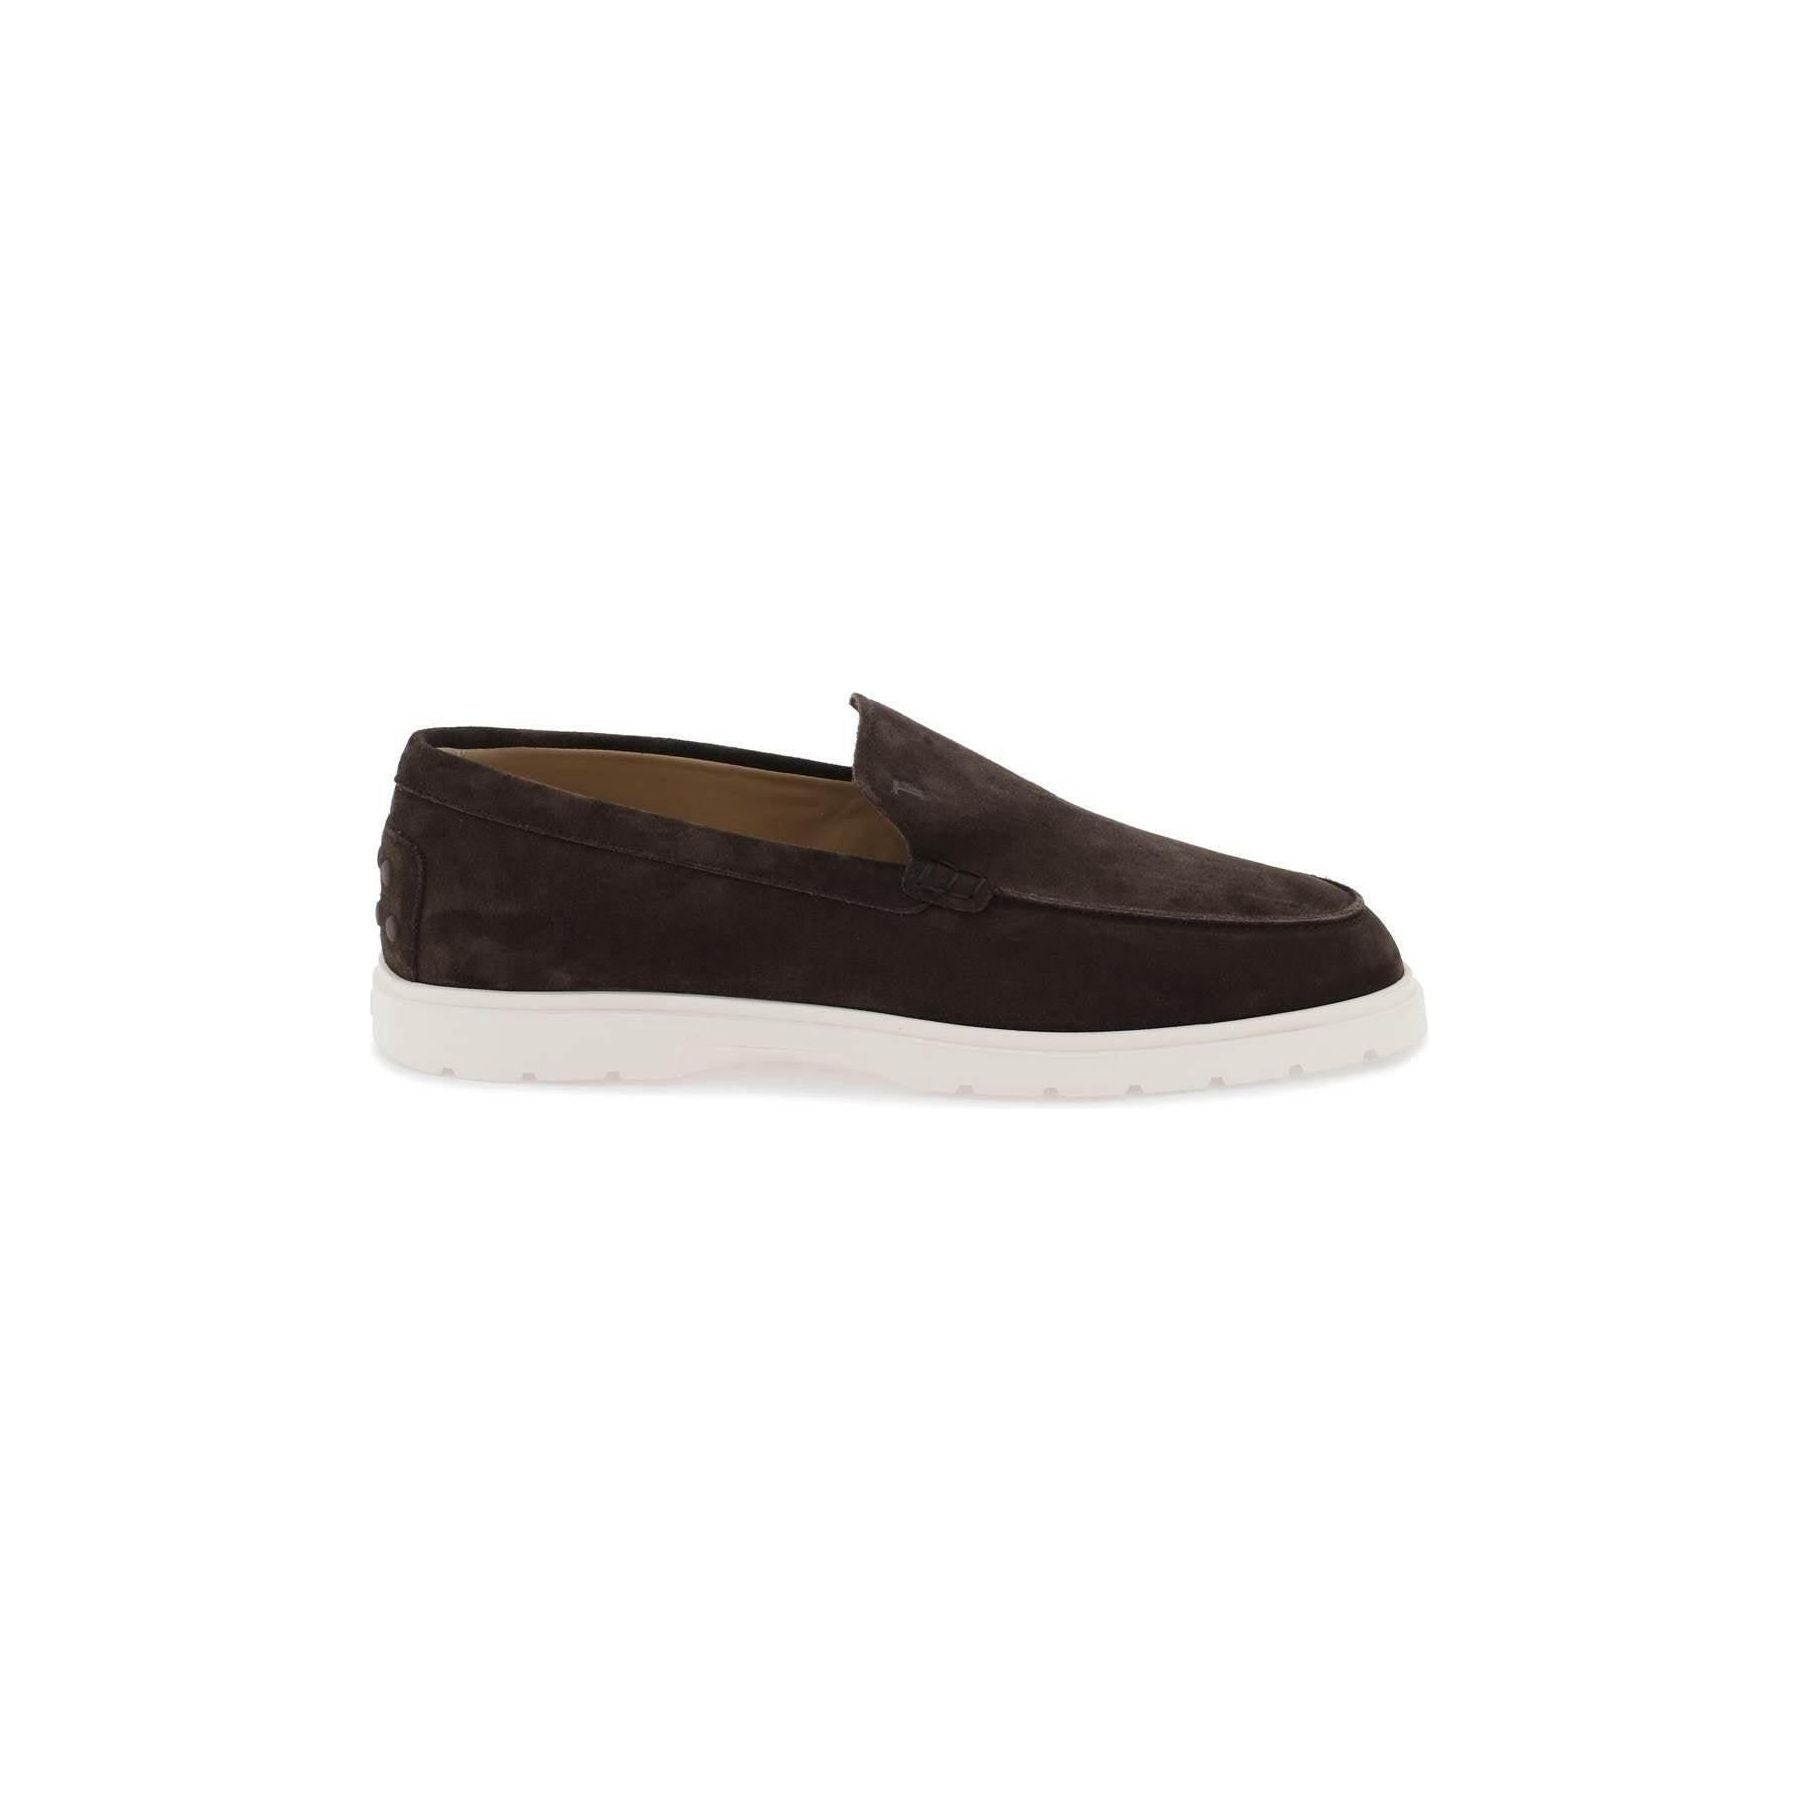 Suede Loafers TOD'S JOHN JULIA.